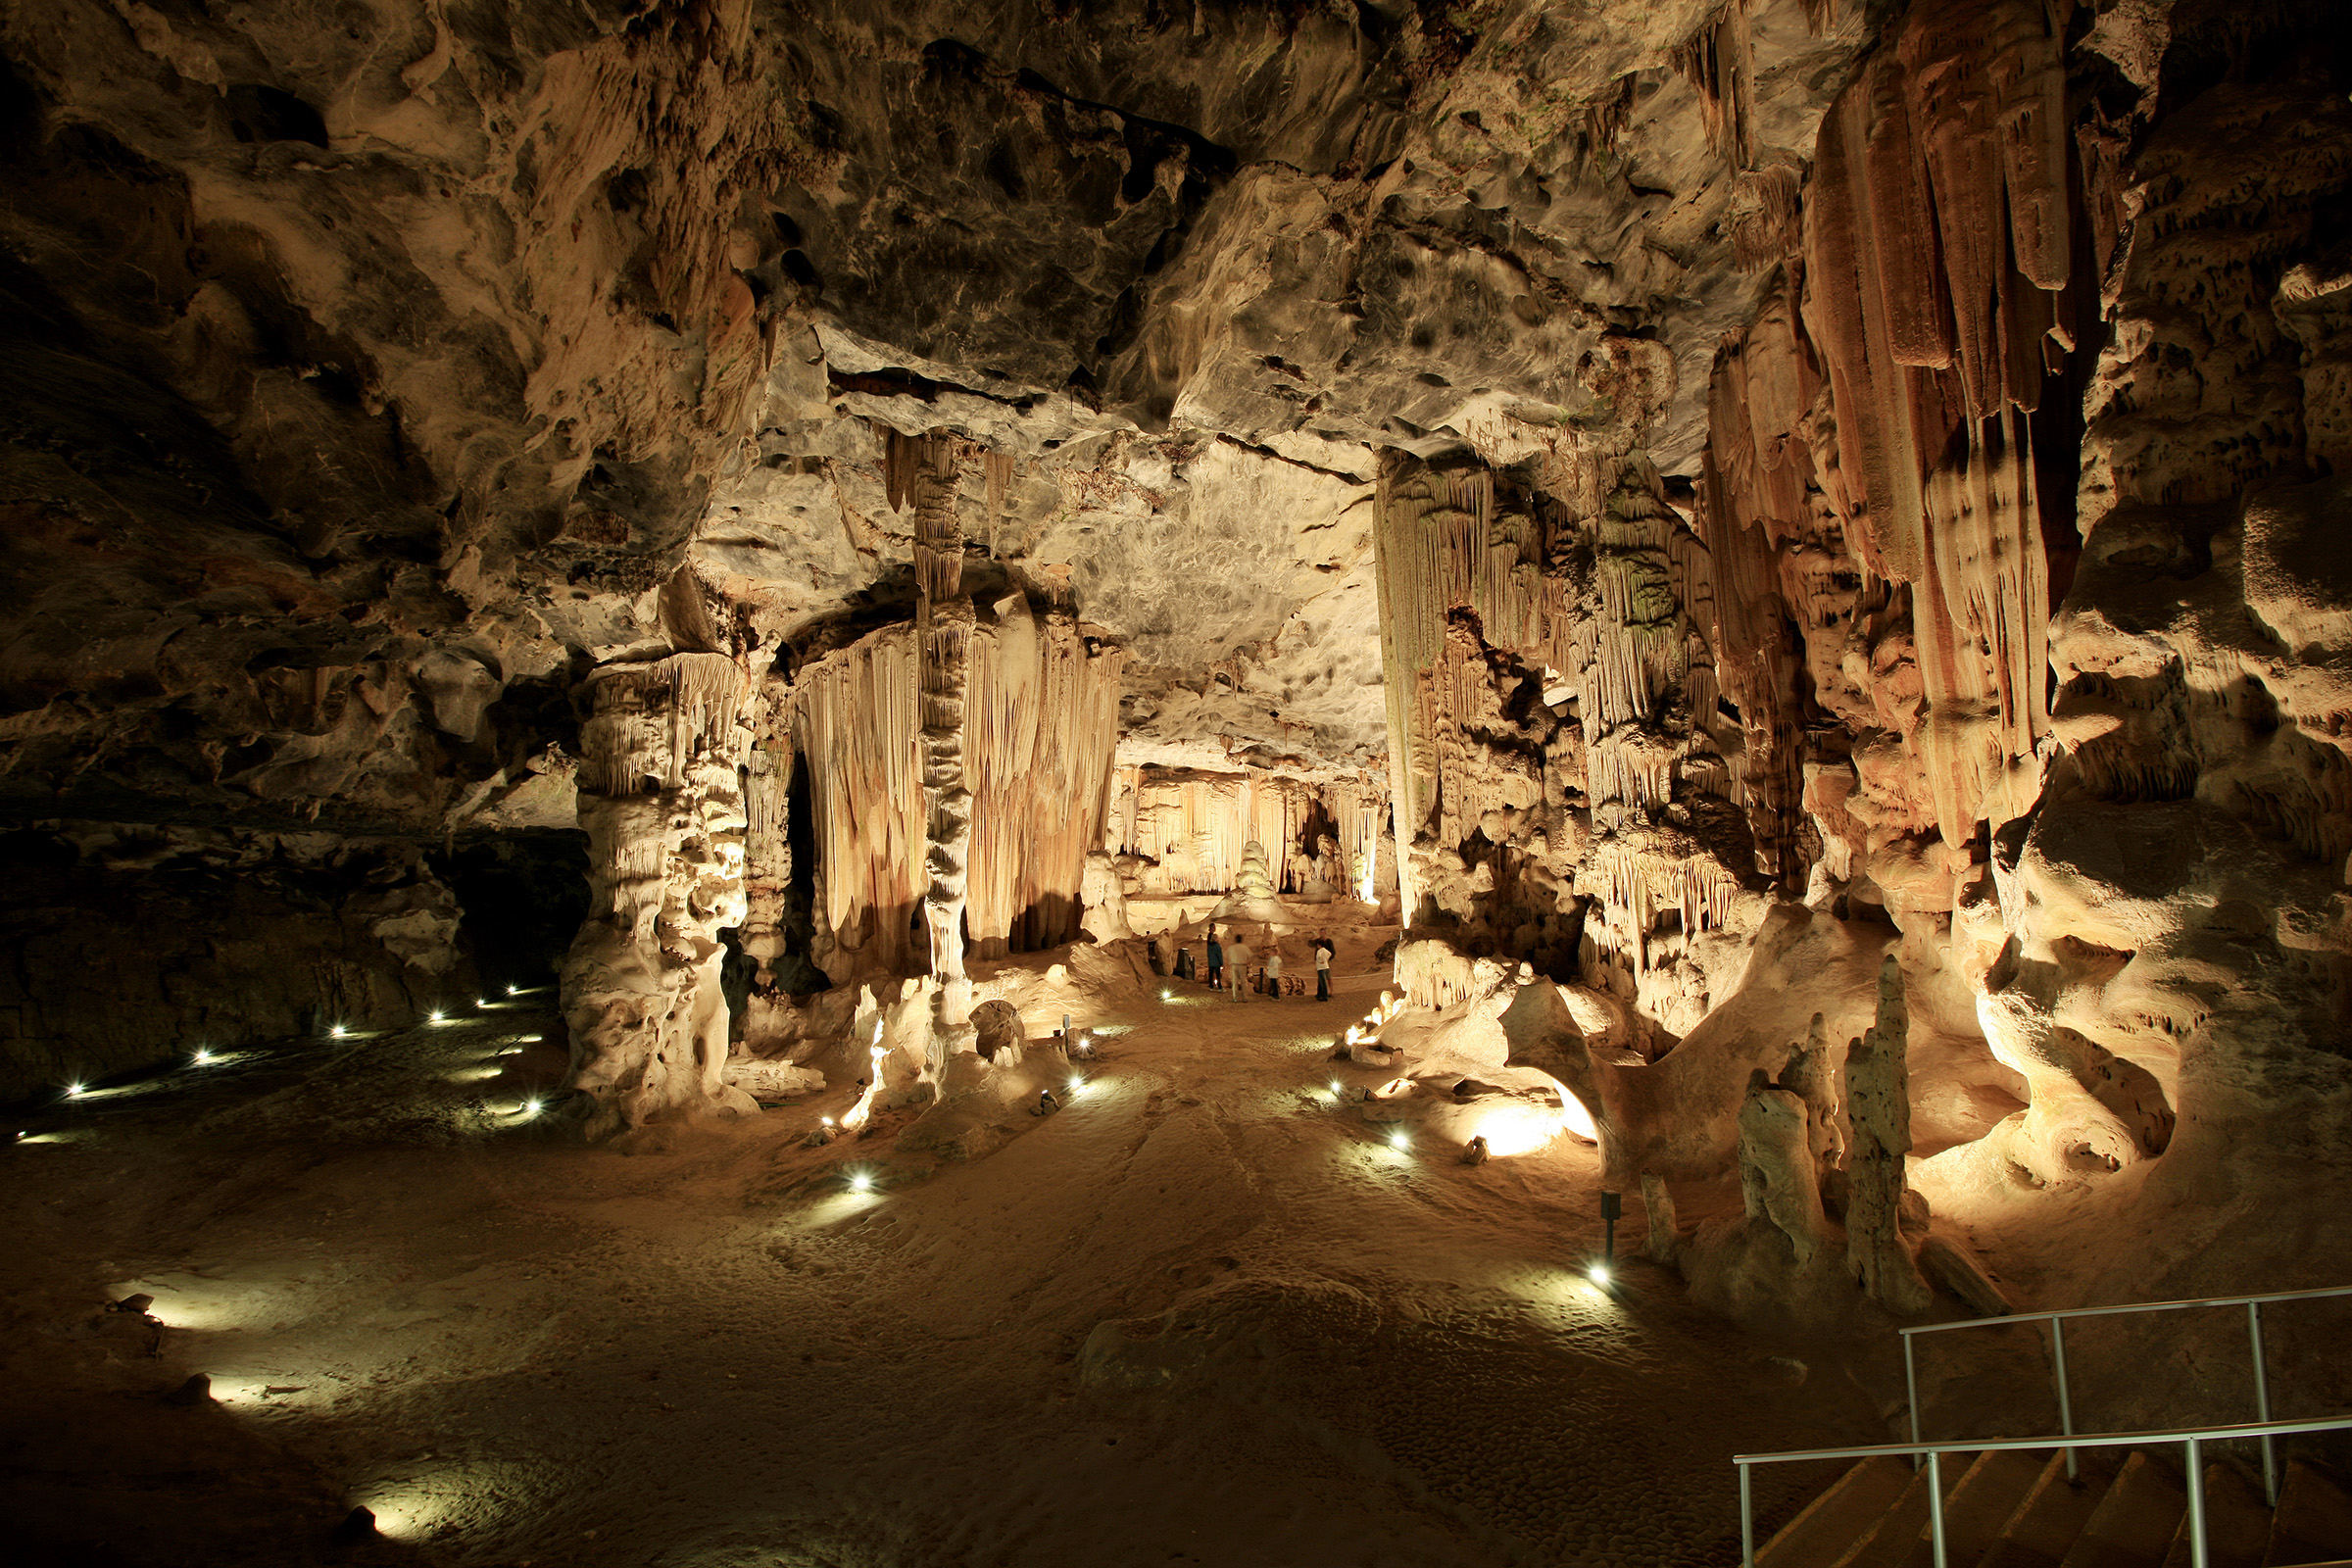 Inside the Cango Caves famous caves at the foothils of the Swartberg range near Oudtshoorn in the Western Cape